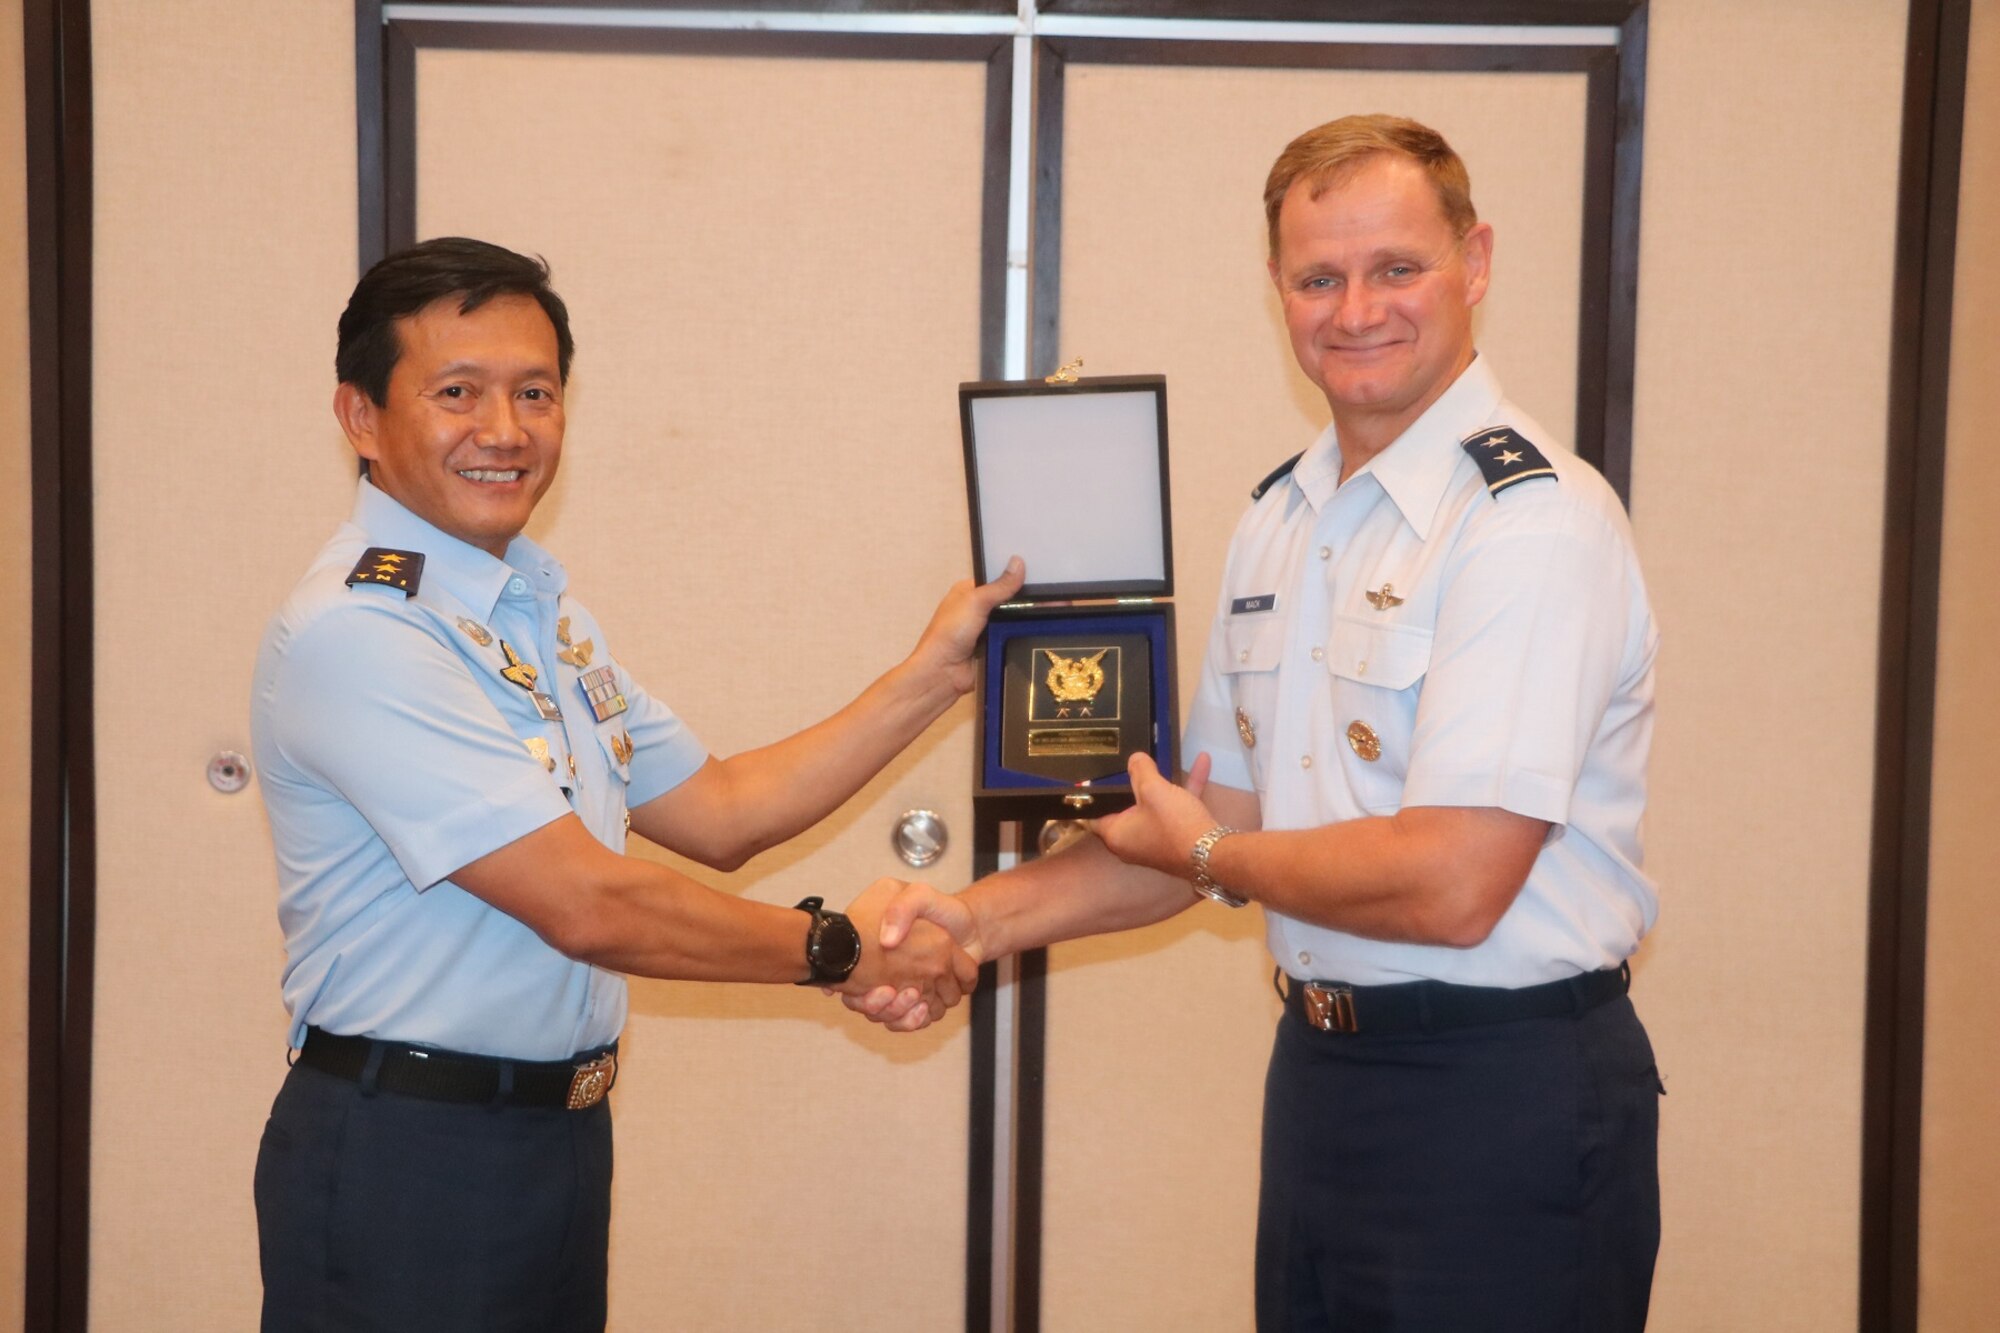 U.S. Air Force Maj. Gen. Russell Mack, Pacific Air Forces (PACAF) deputy commander, receives a gift from Air Vice Marshal Johanes Berchmans, Assistant to the Chief of Staff for Operations, Tentara Nasional Indonesia Angkatan Udara, or TNI AU (Indonesian Air Force), during the 11th annual Indonesian Air Force-PACAF Airman-to-Airman talks in Denpasar, Indonesia, May 16, 2019.